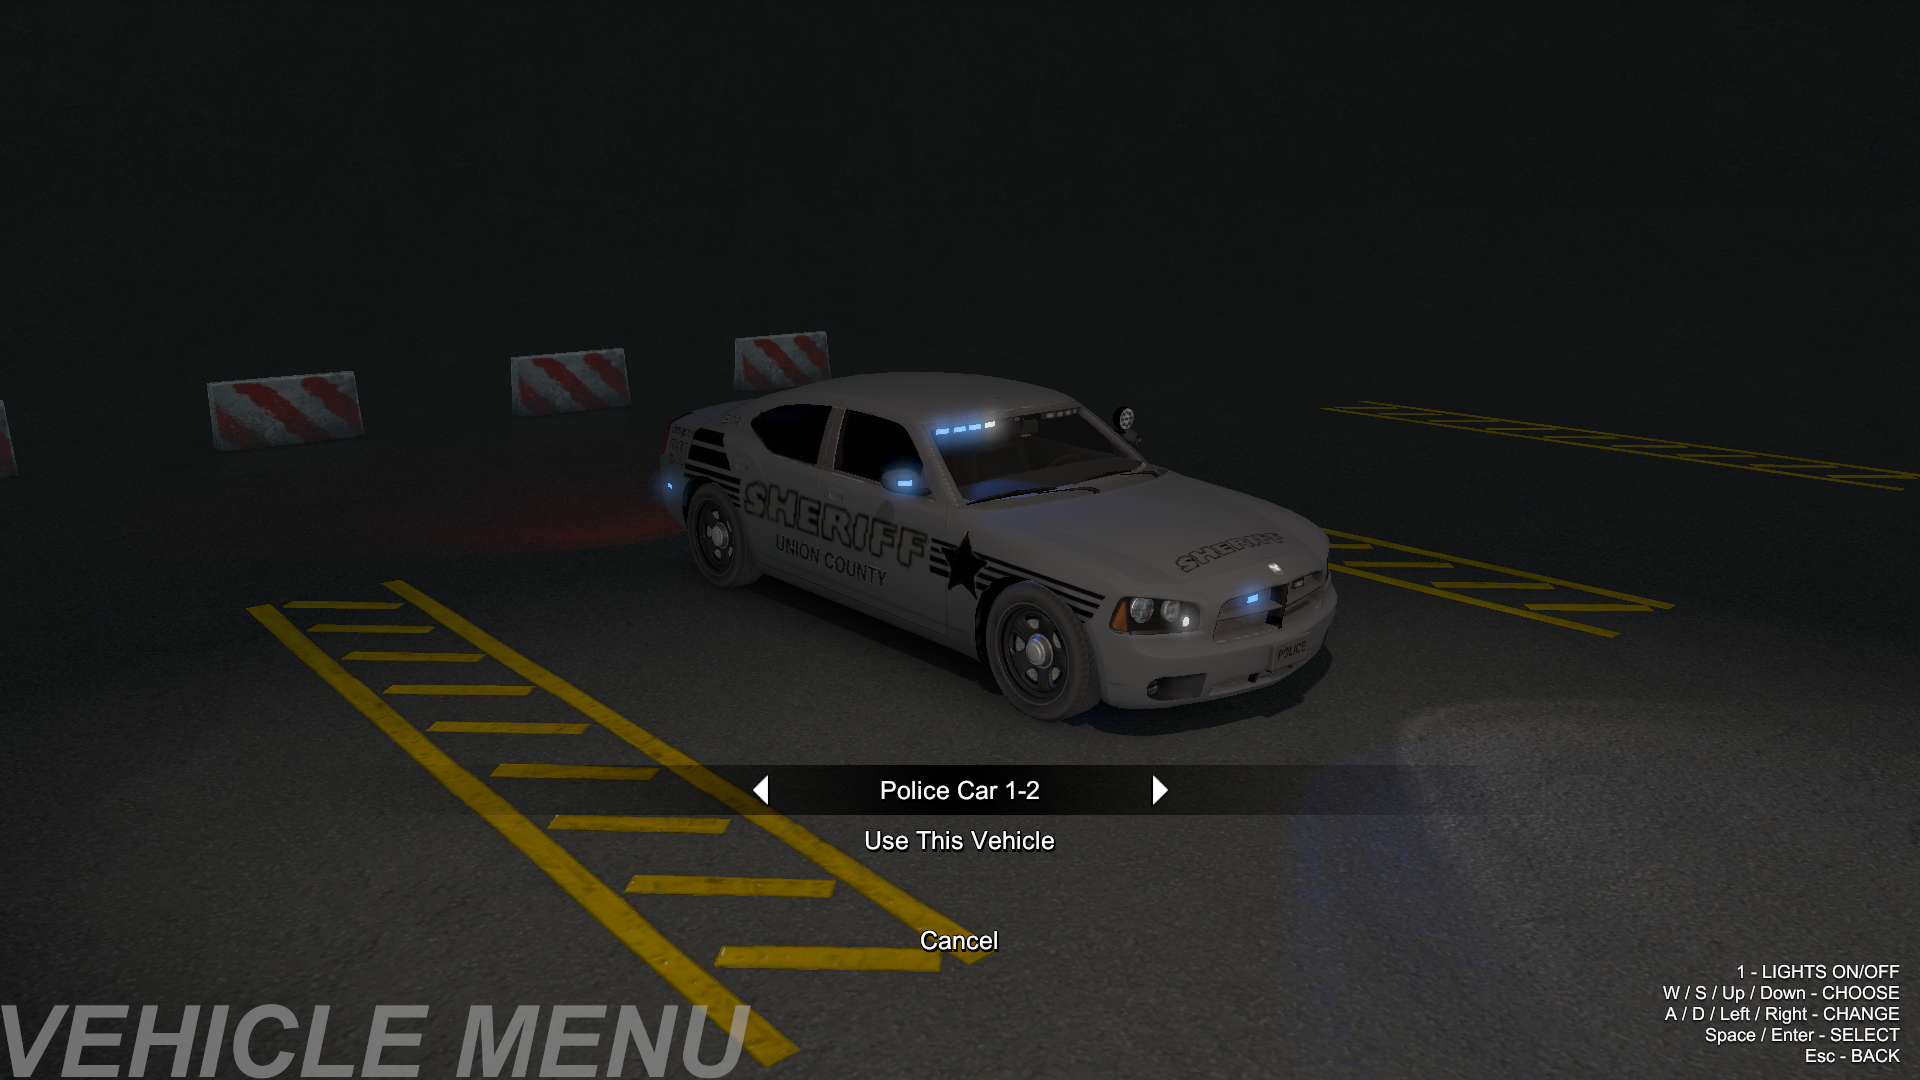 More information about "Union County Sheriff's Stealth Car (Undercover)"